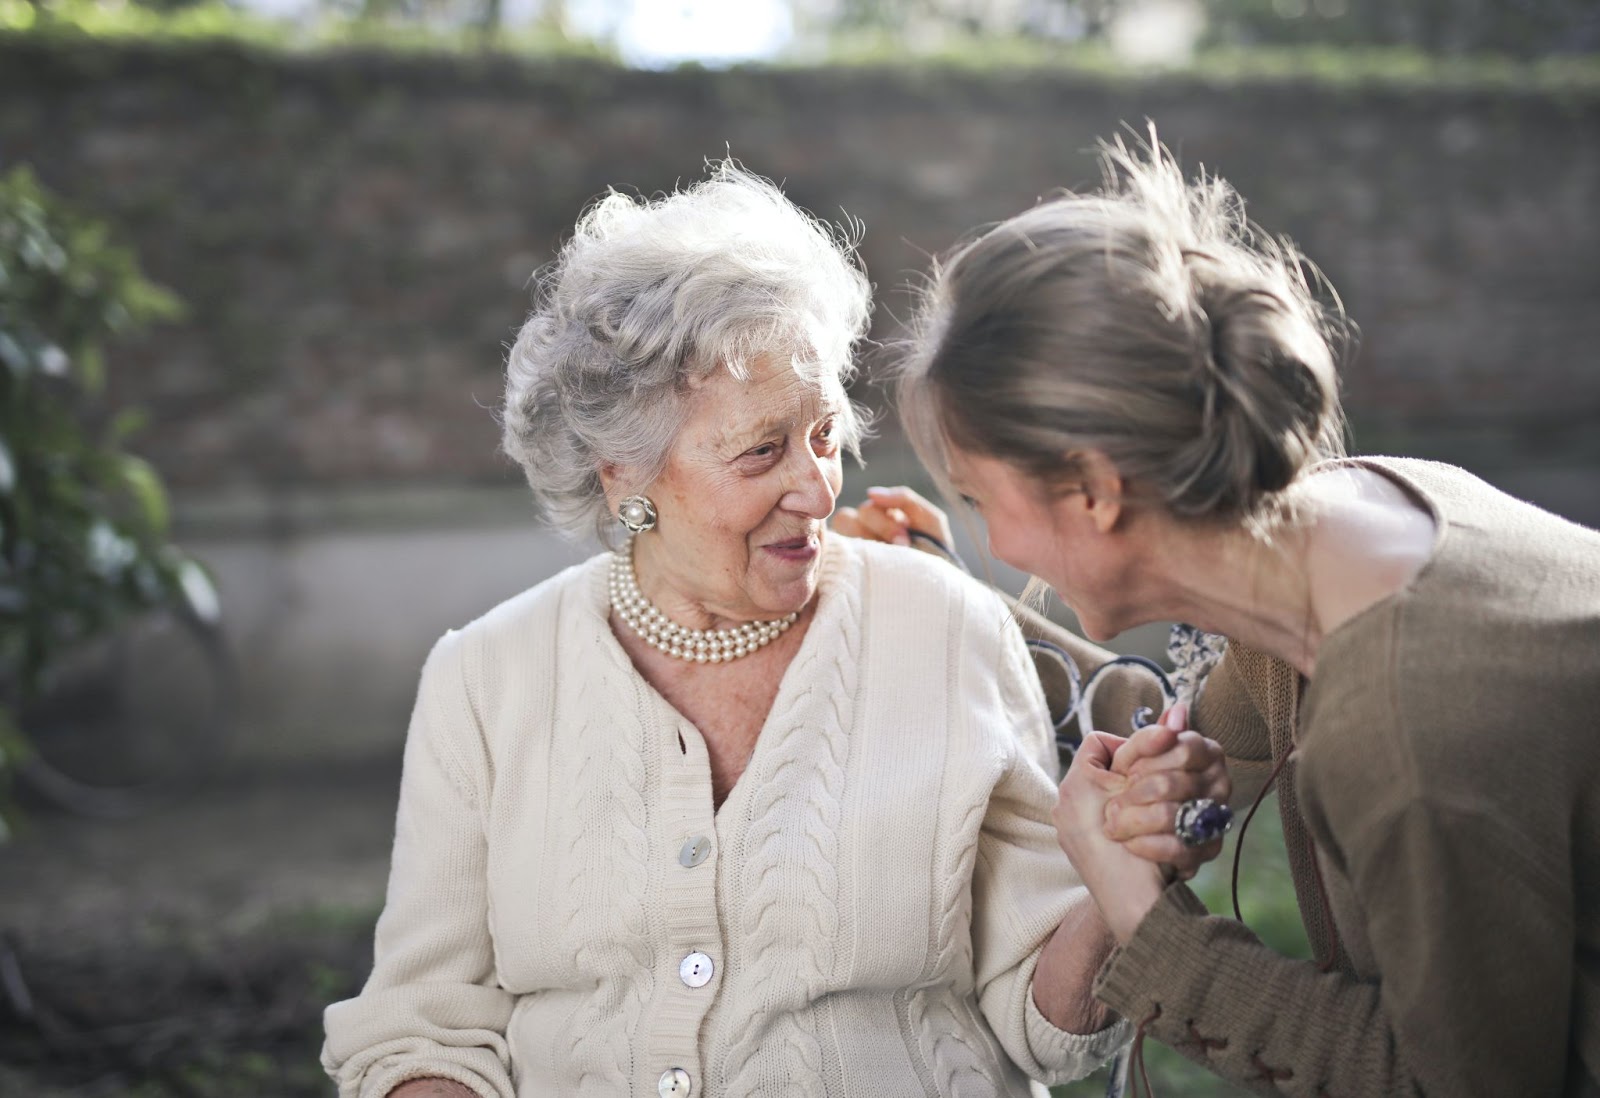 An adult laughing with her hands placed around the back of a senior citizen